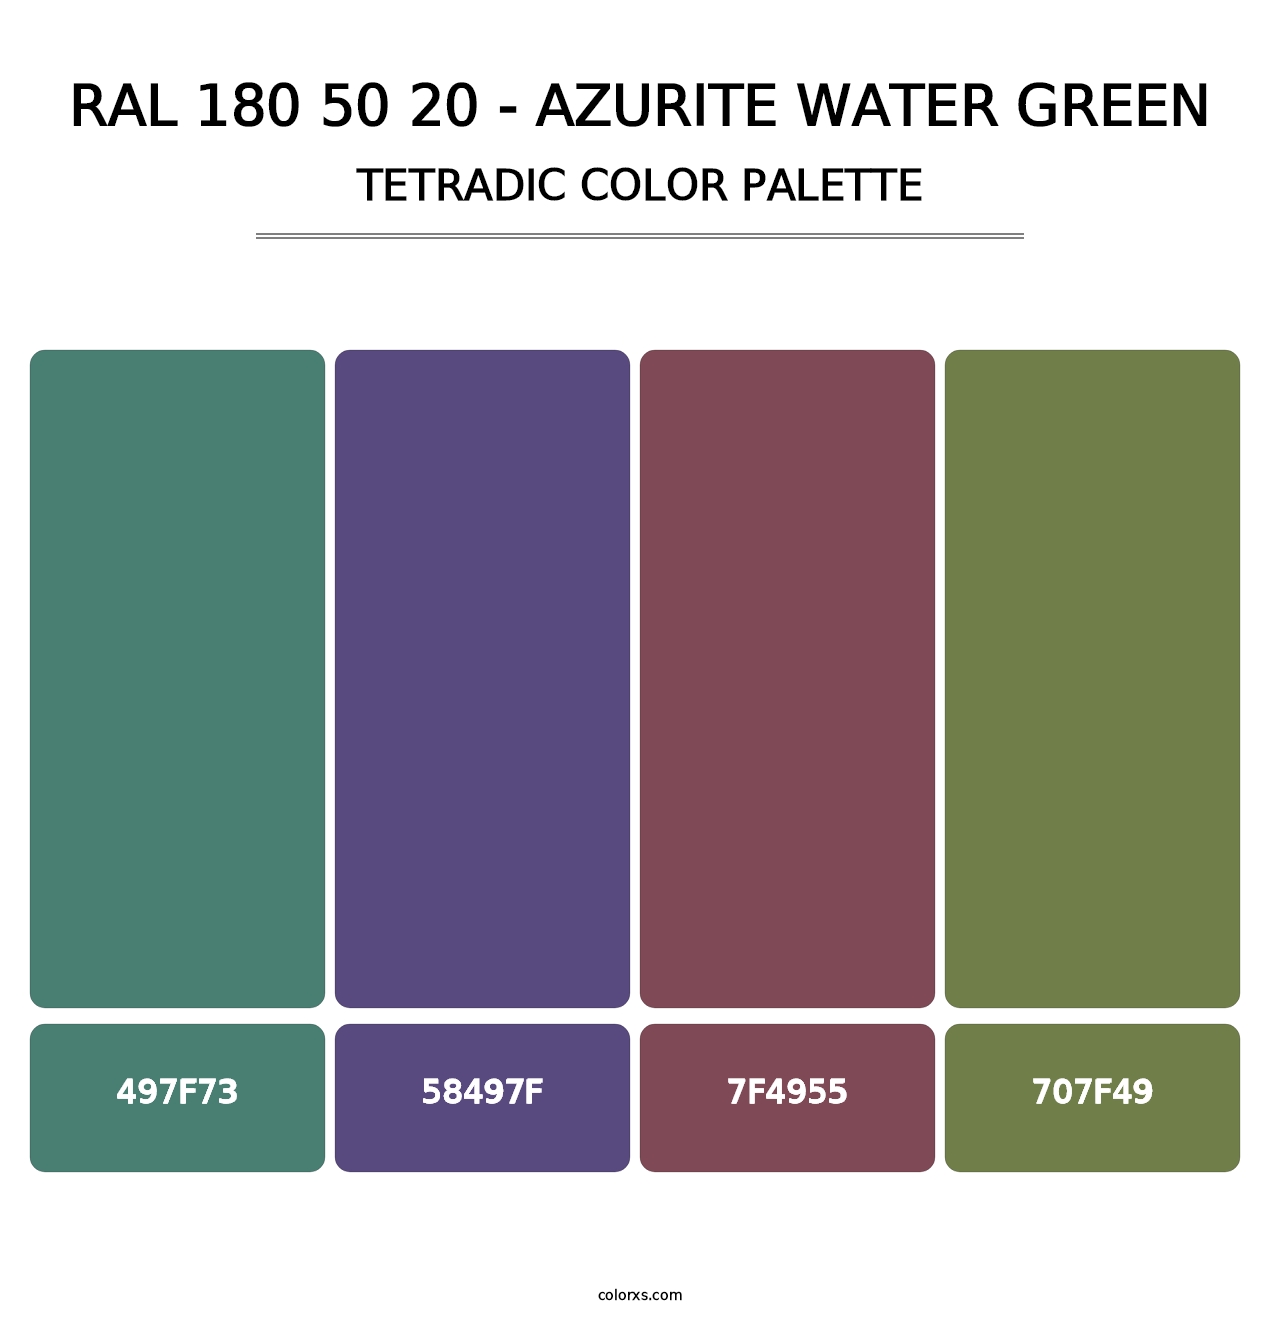 RAL 180 50 20 - Azurite Water Green - Tetradic Color Palette